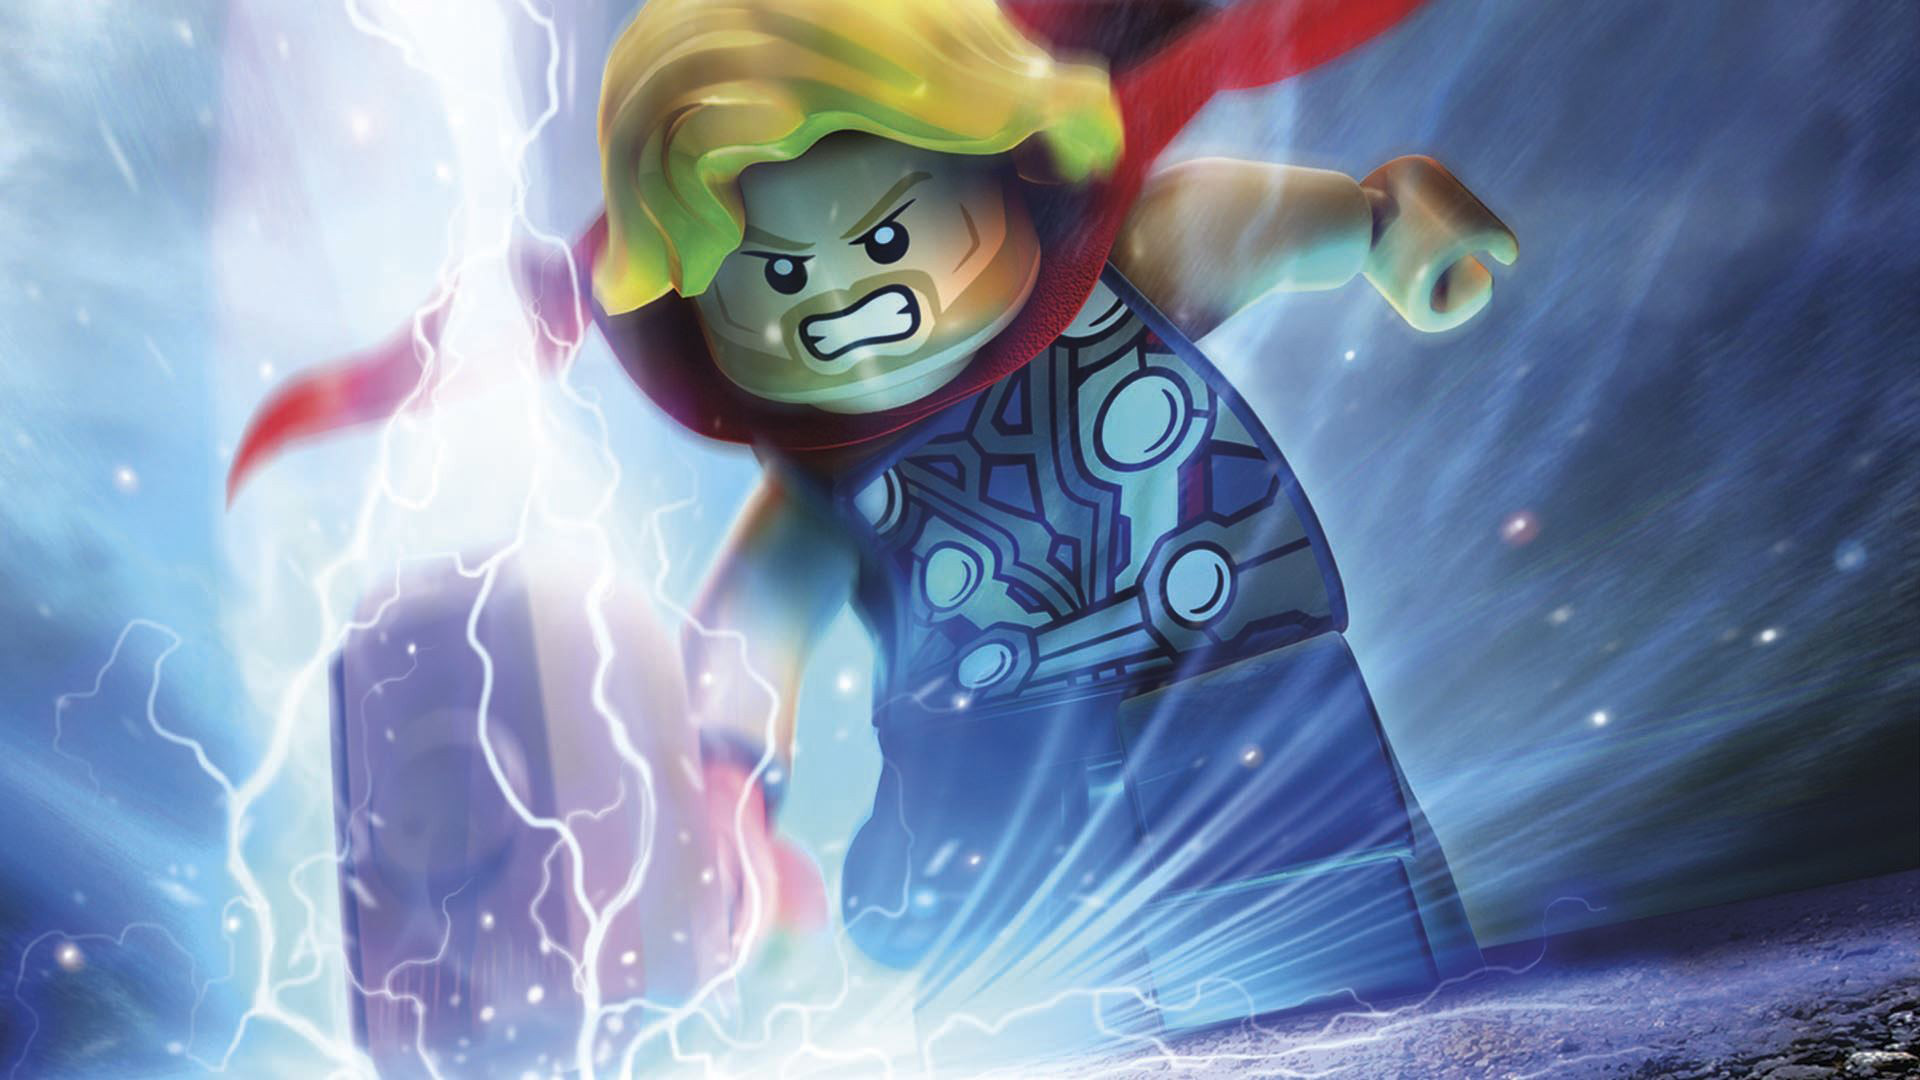 1920x1080 Free Lego Marvel Super Heroes Wallpaper in 